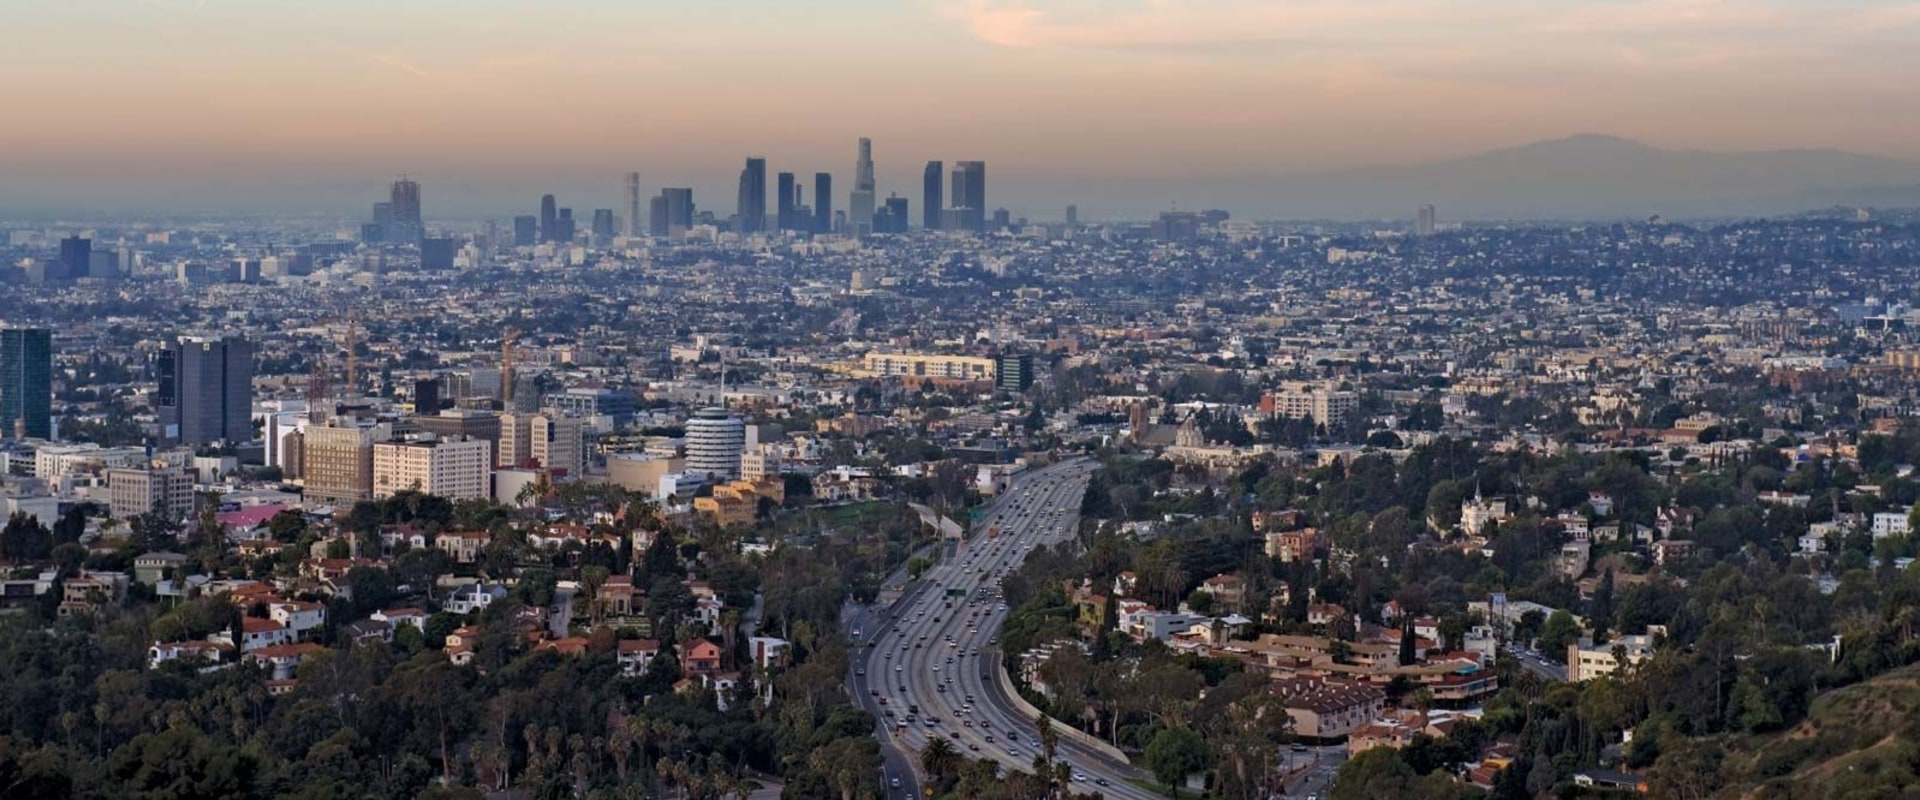 Is los angeles a city or country?